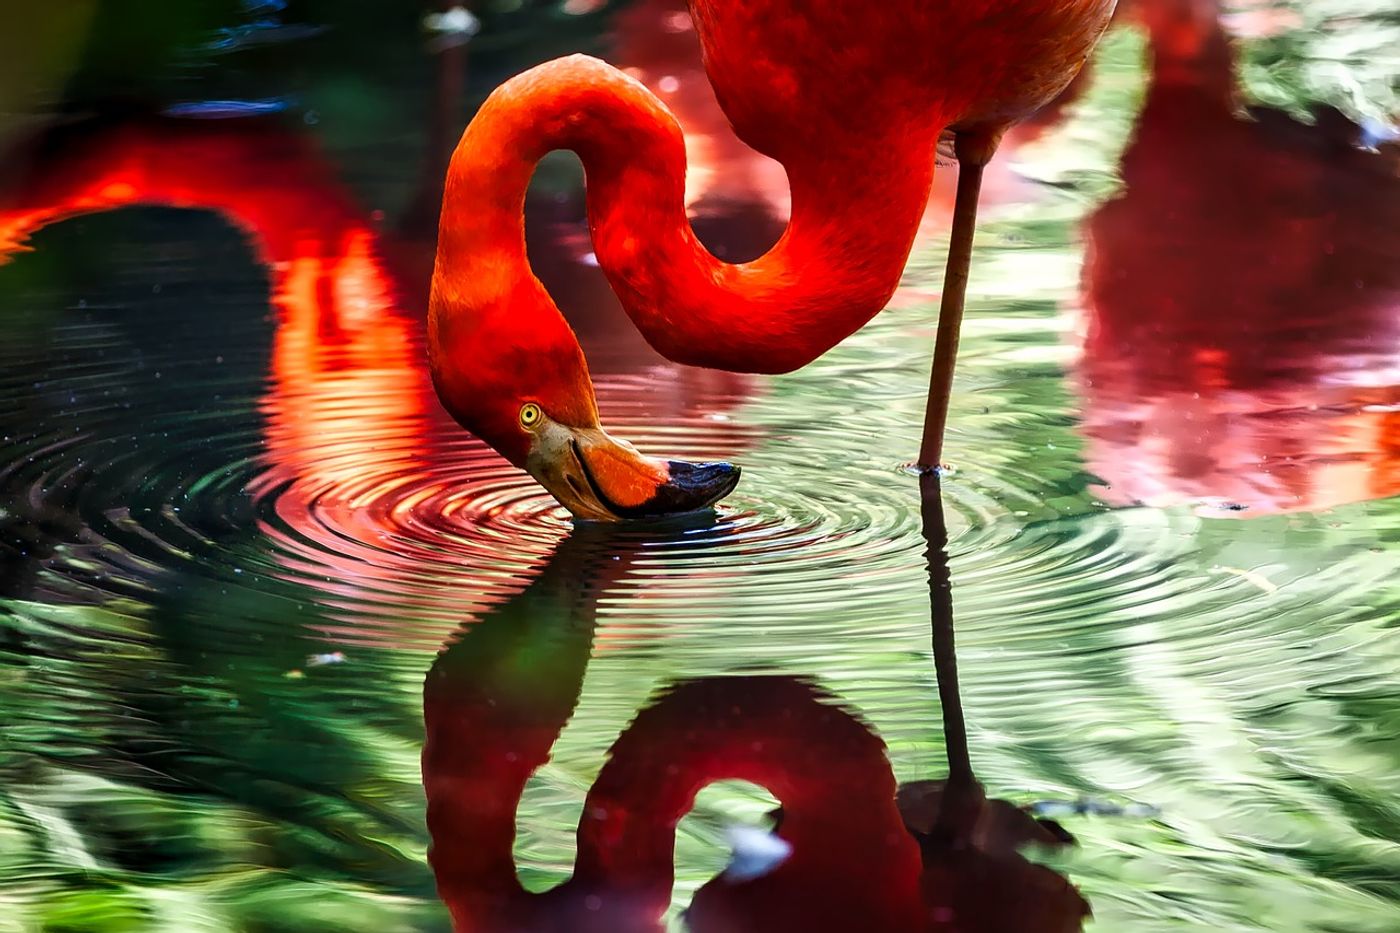 Do flamingos save energy by standing still on just one leg?